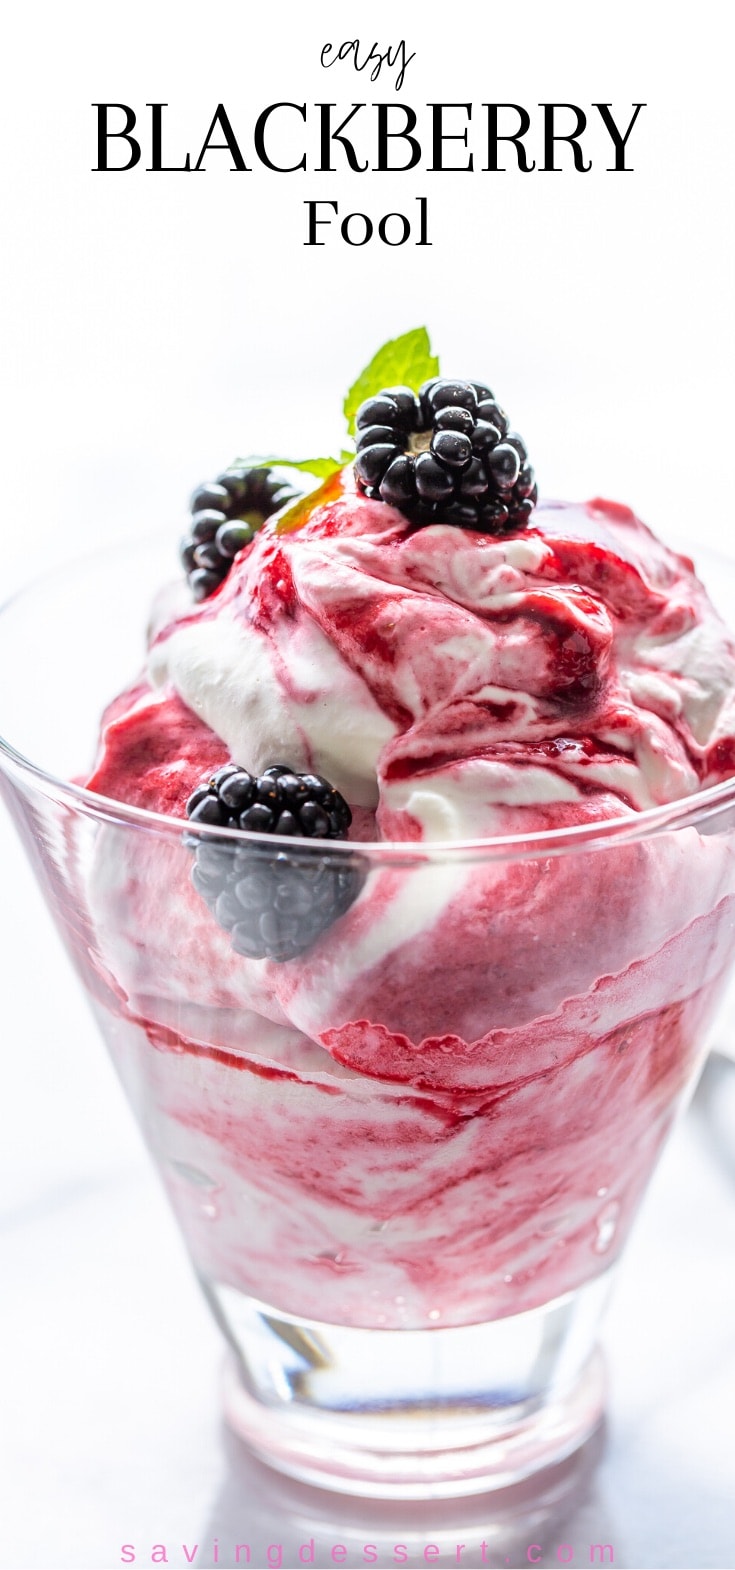 A closeup of a glass filled with a Blackberry Fool dessert topped with fresh blackberries and fruit mint leaves